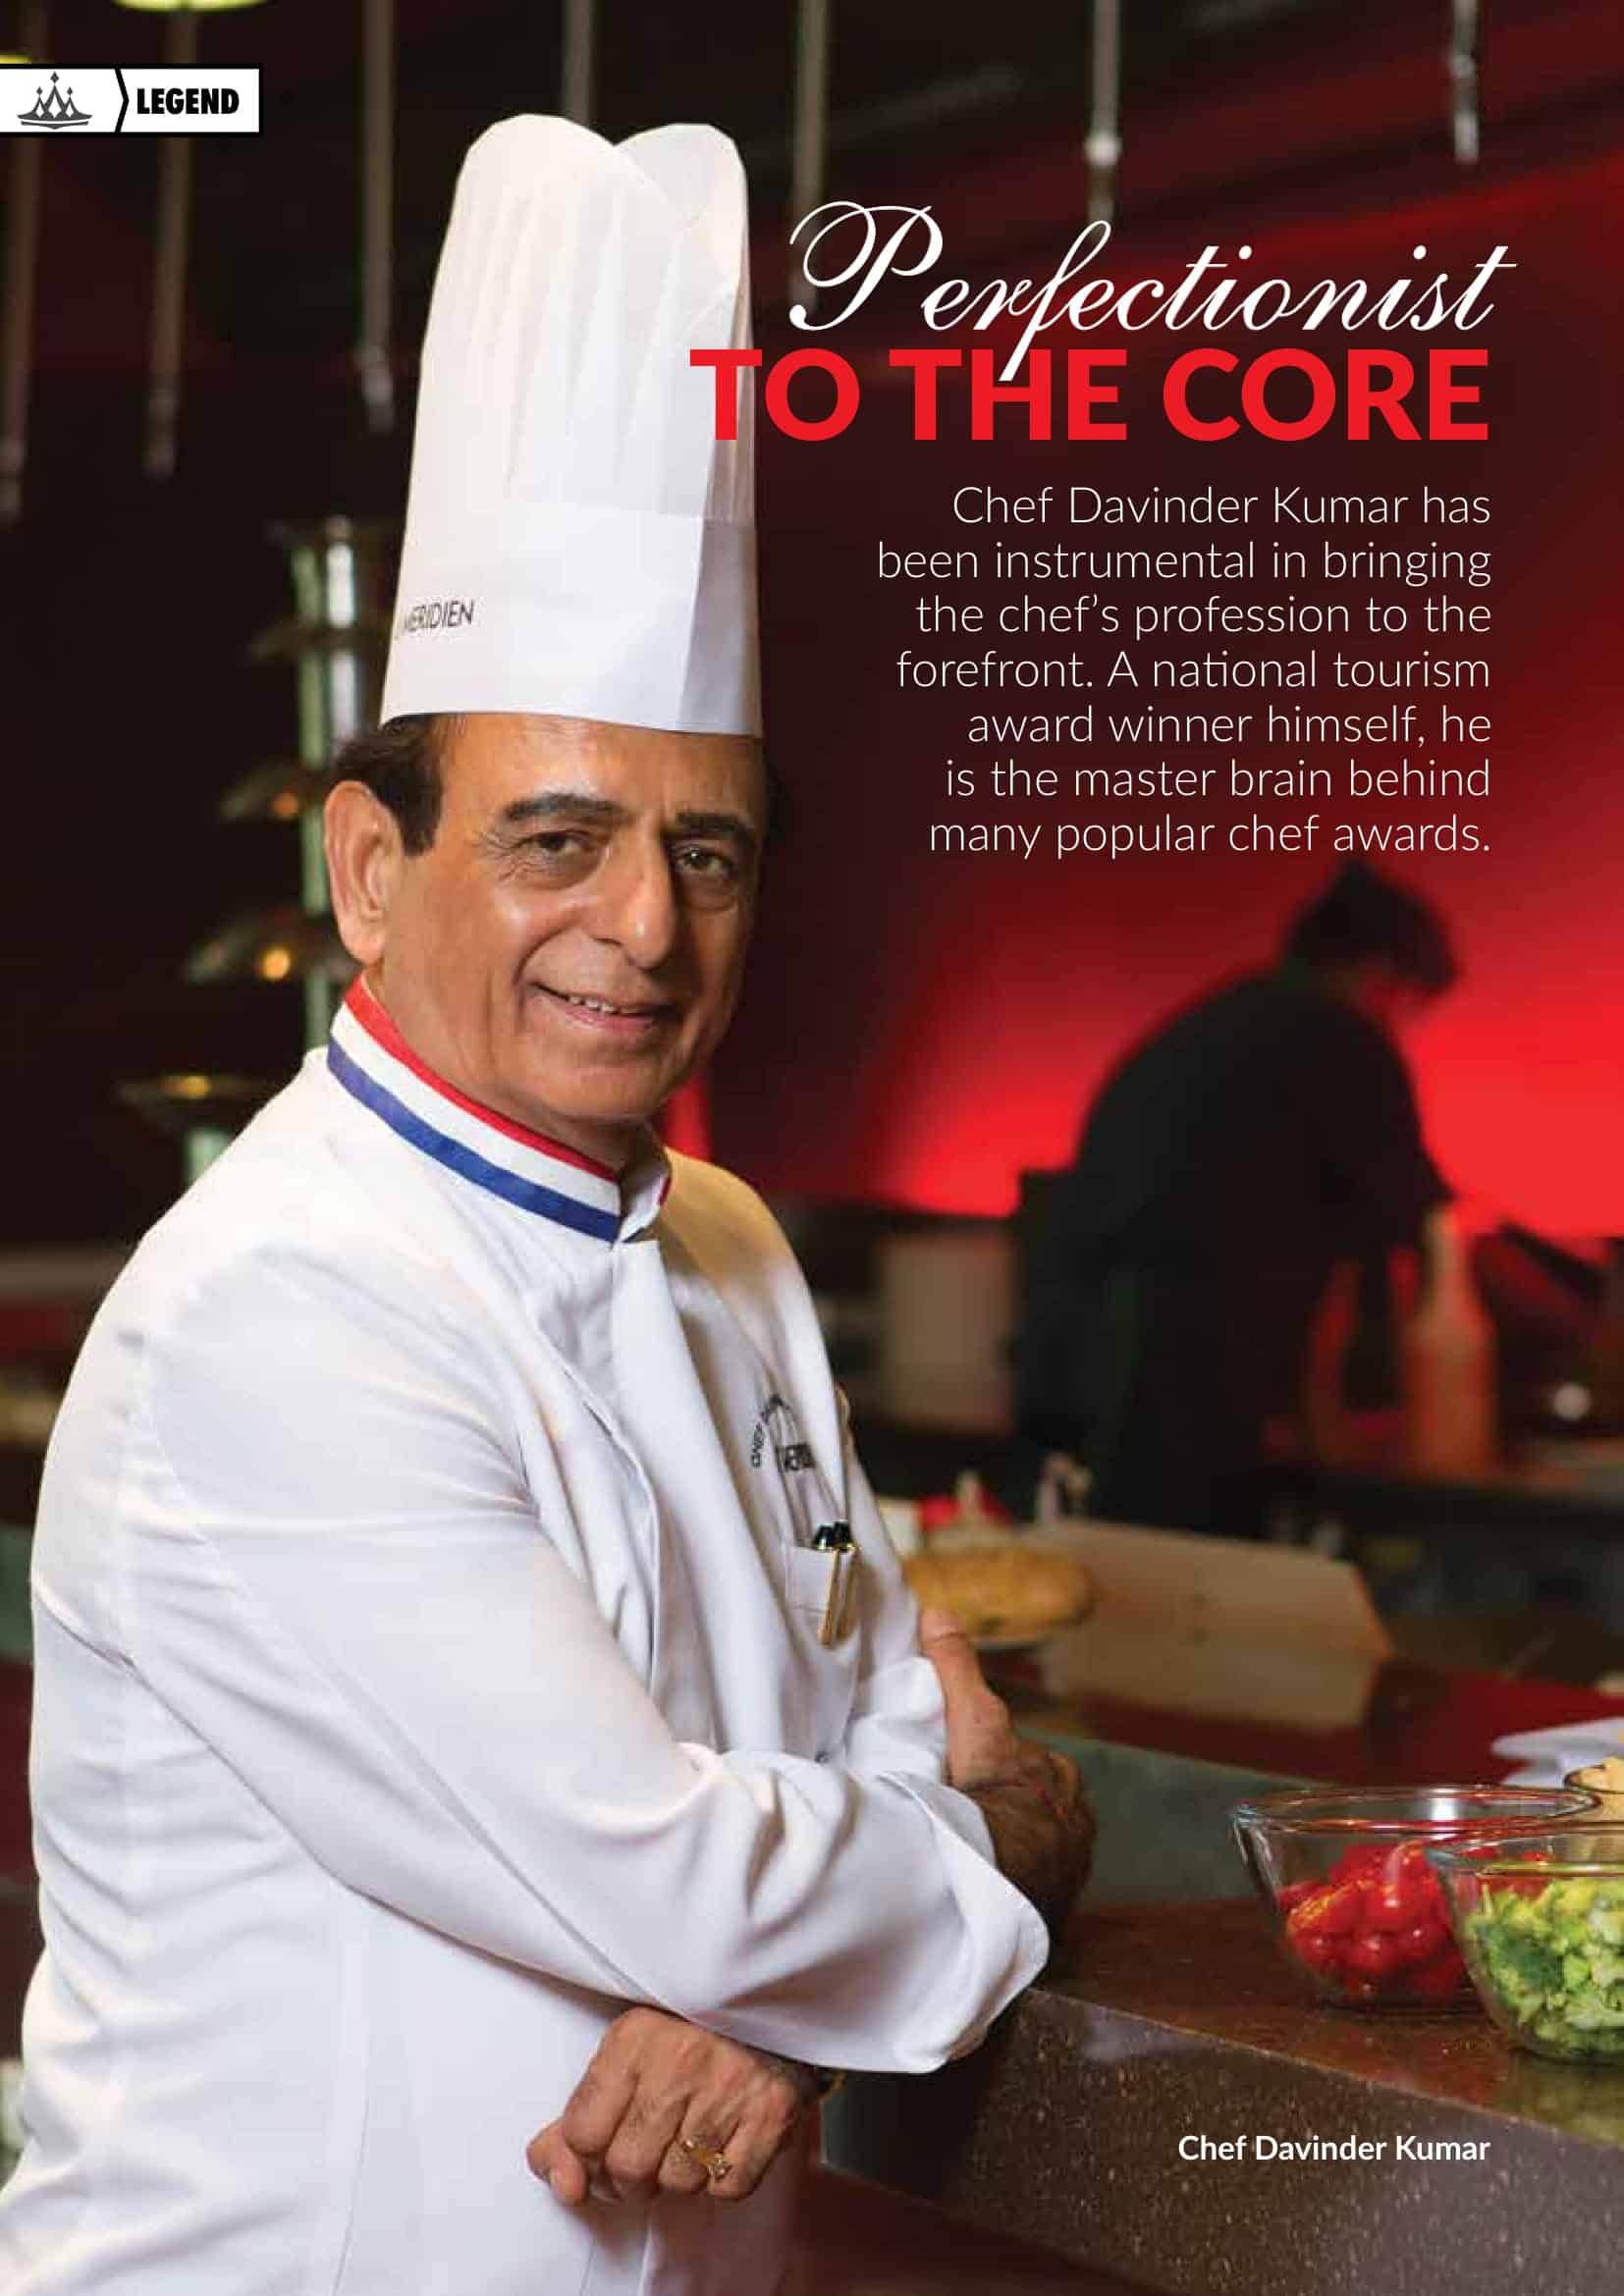 A profile-piece on Chef Davinder Kumar by ‘Food and Beverage Buzz Magazine’